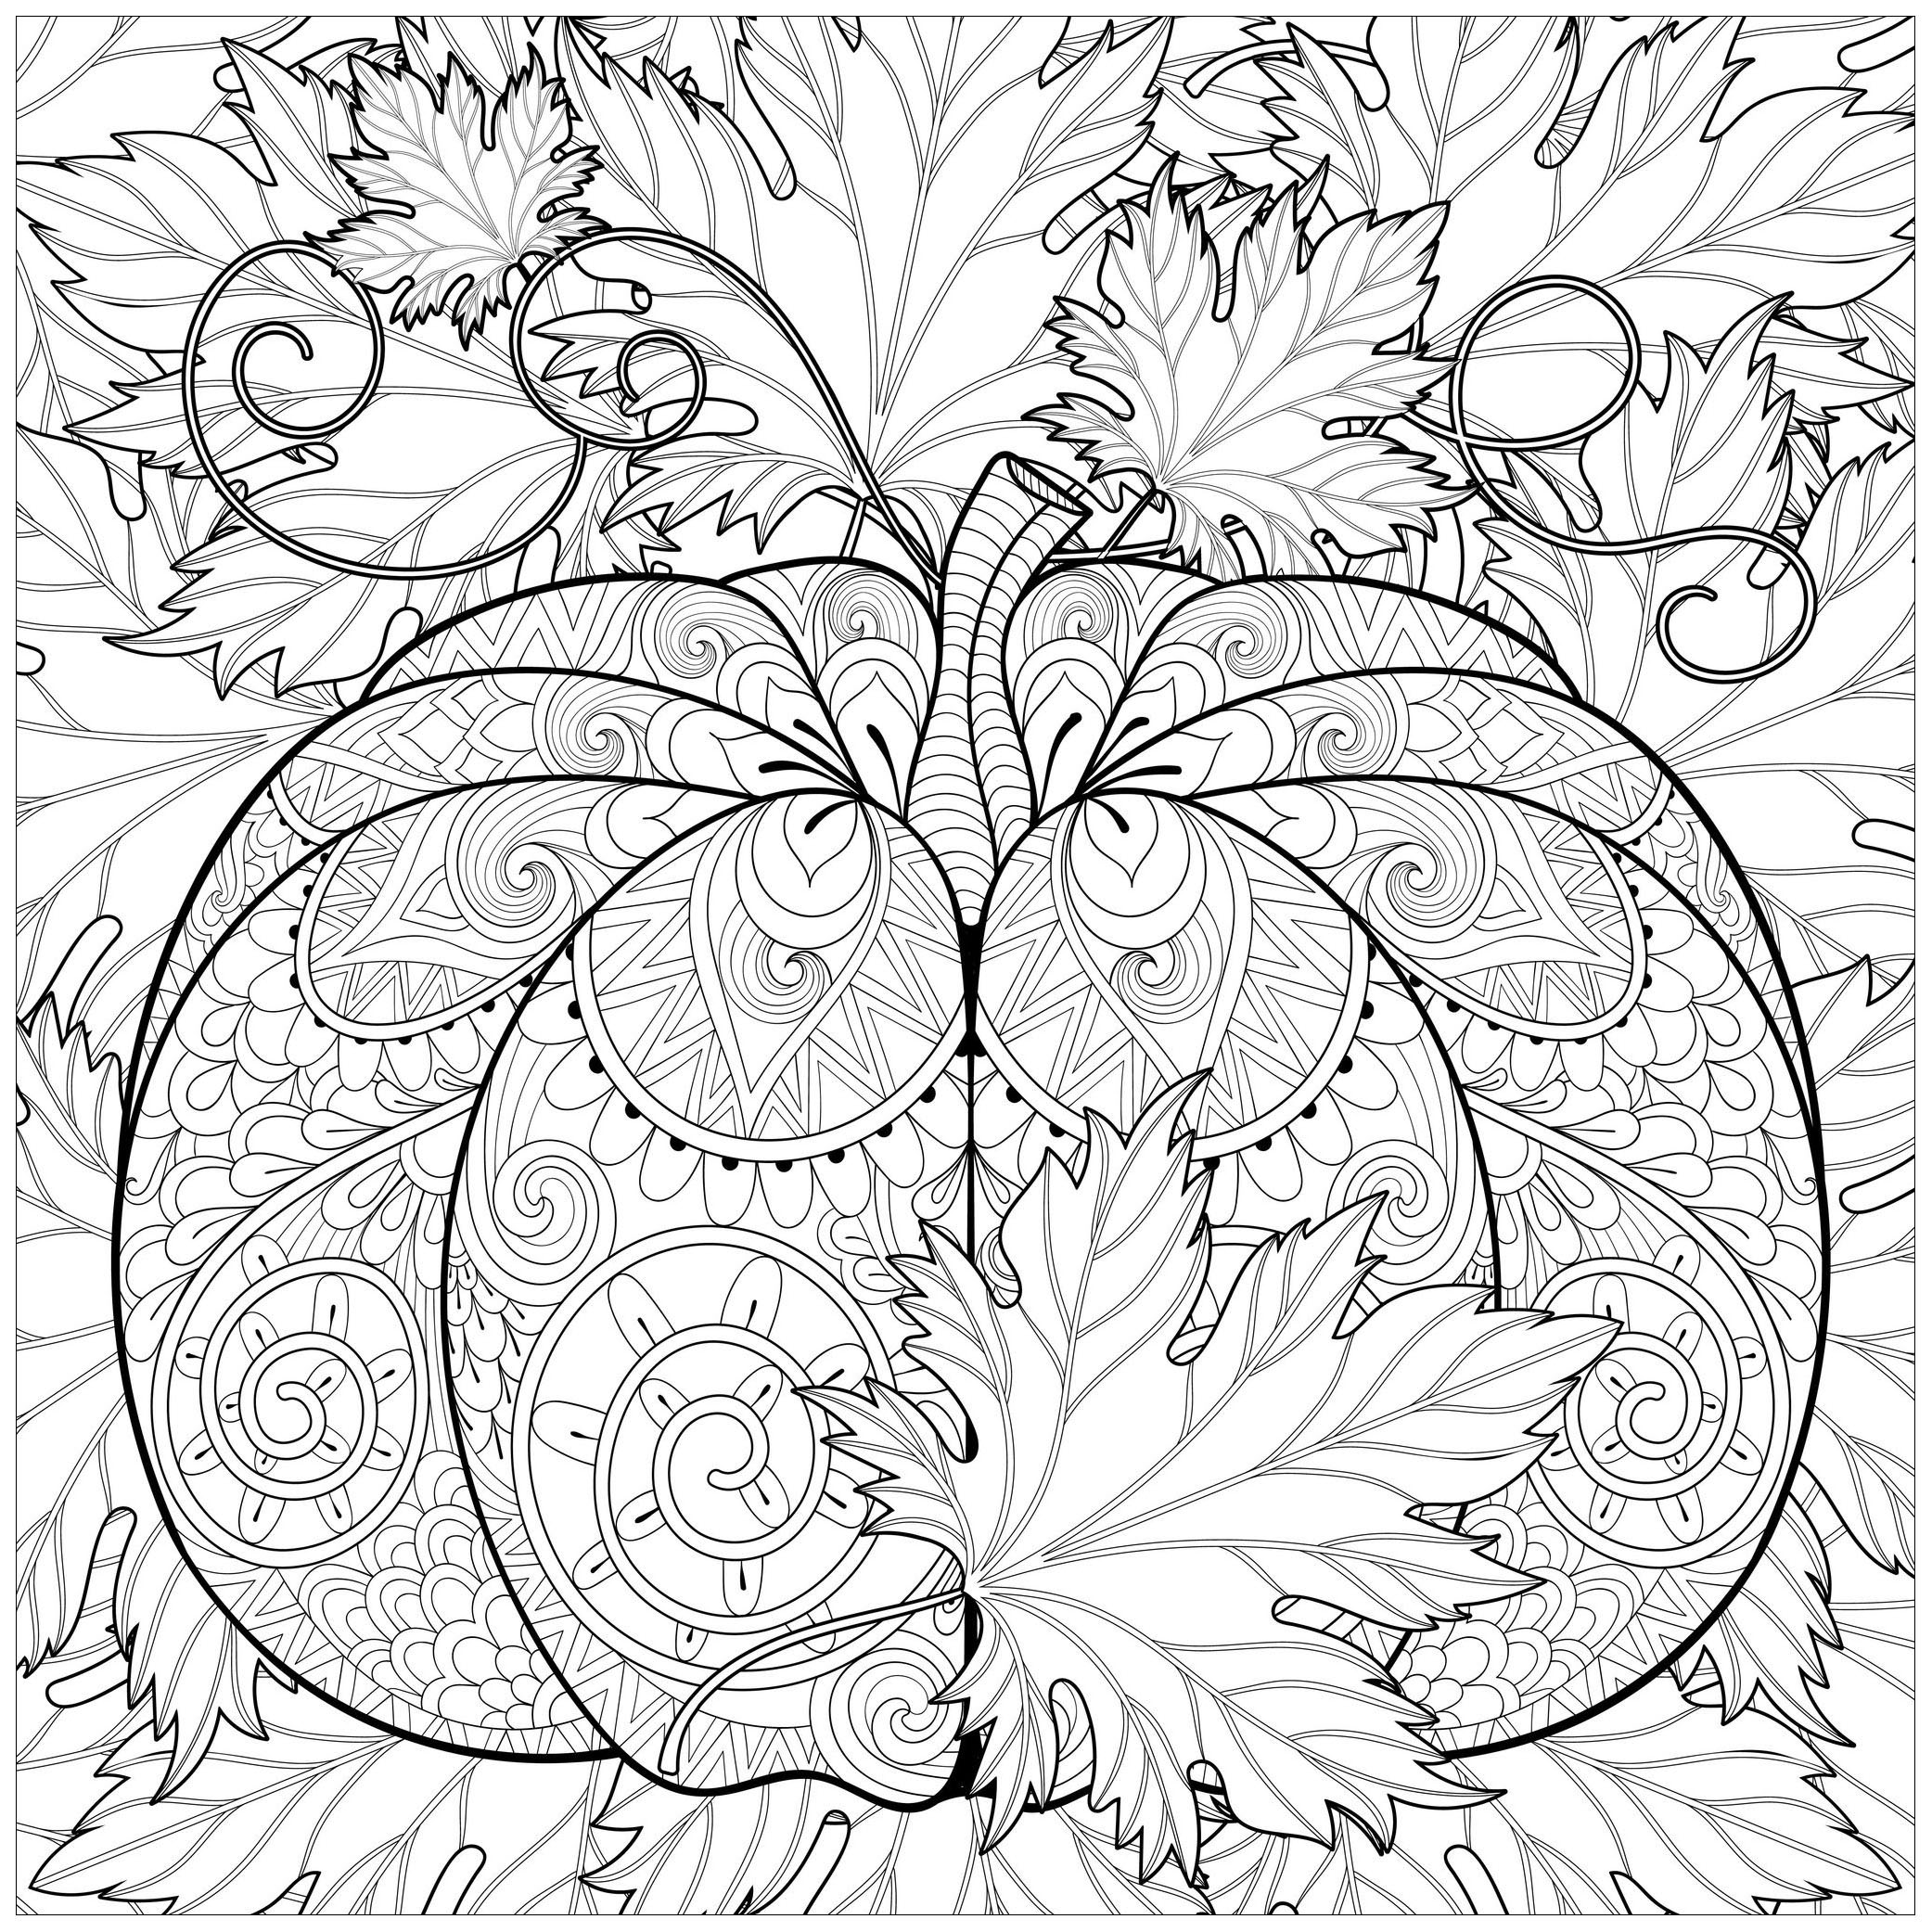 decorated-pumpkin-with-autumn-leaves-halloween-adult-coloring-pages